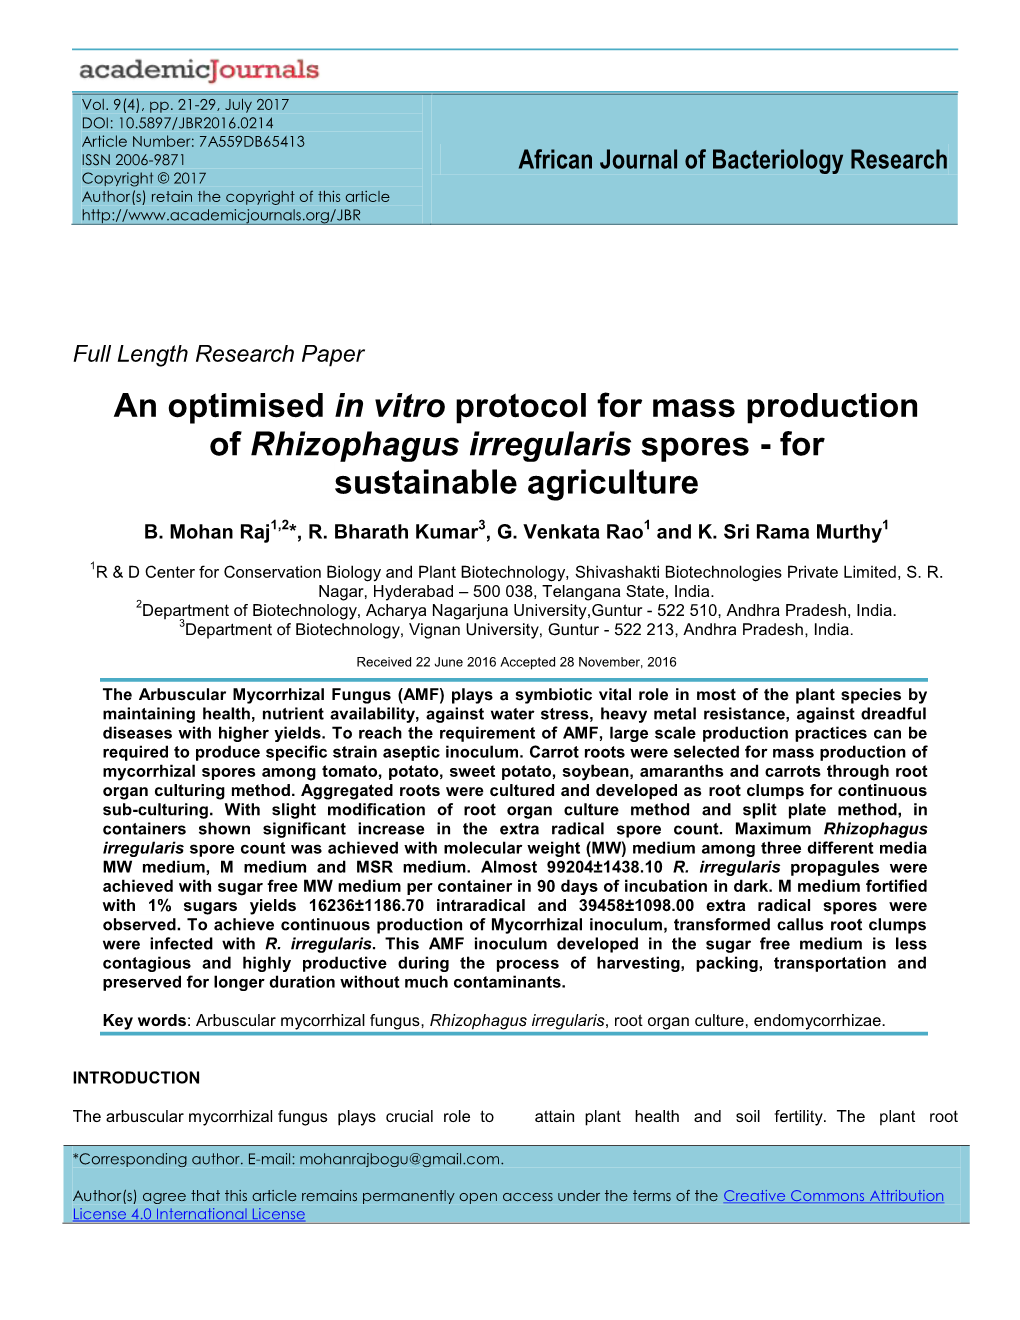 An Optimised in Vitro Protocol for Mass Production of Rhizophagus Irregularis Spores - for Sustainable Agriculture